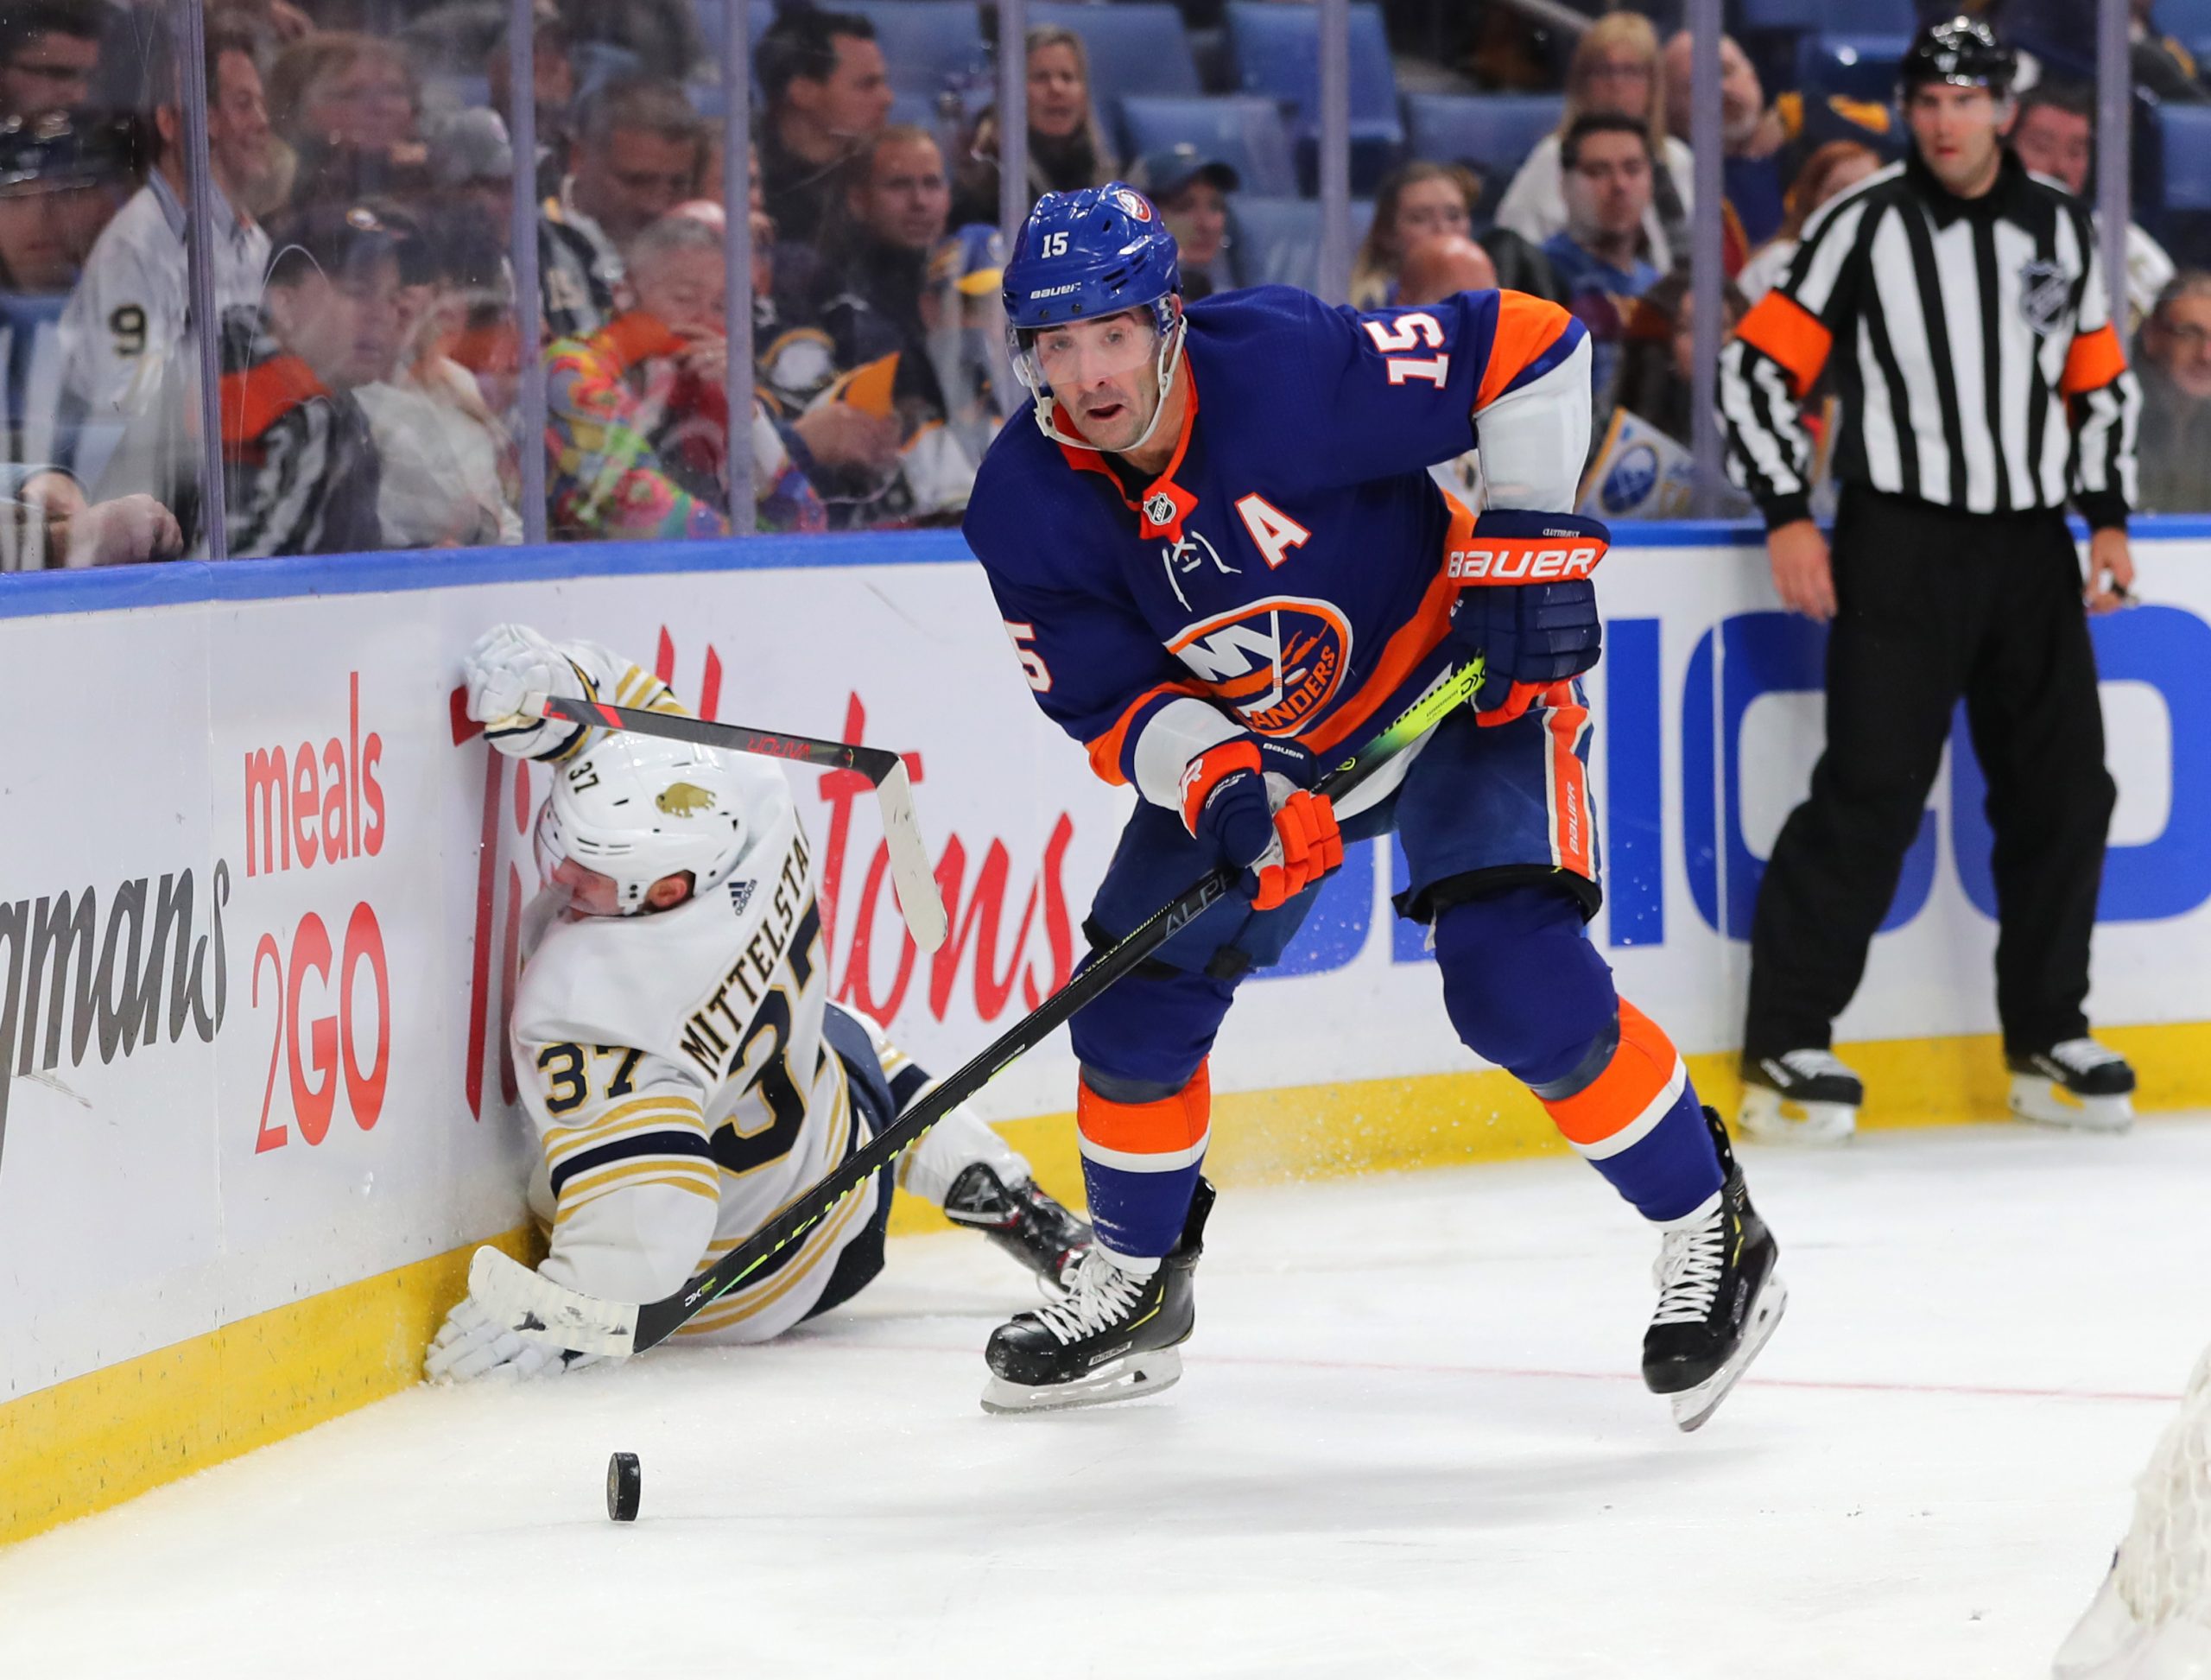 Nov 2, 2019; Buffalo, NY, USA; New York Islanders right wing Cal Clutterbuck (15) looks to make a pass as Buffalo Sabres center Casey Mittelstadt (37) falls down during the third period at KeyBank Center. Mandatory Credit: Timothy T. Ludwig-USA TODAY Sports